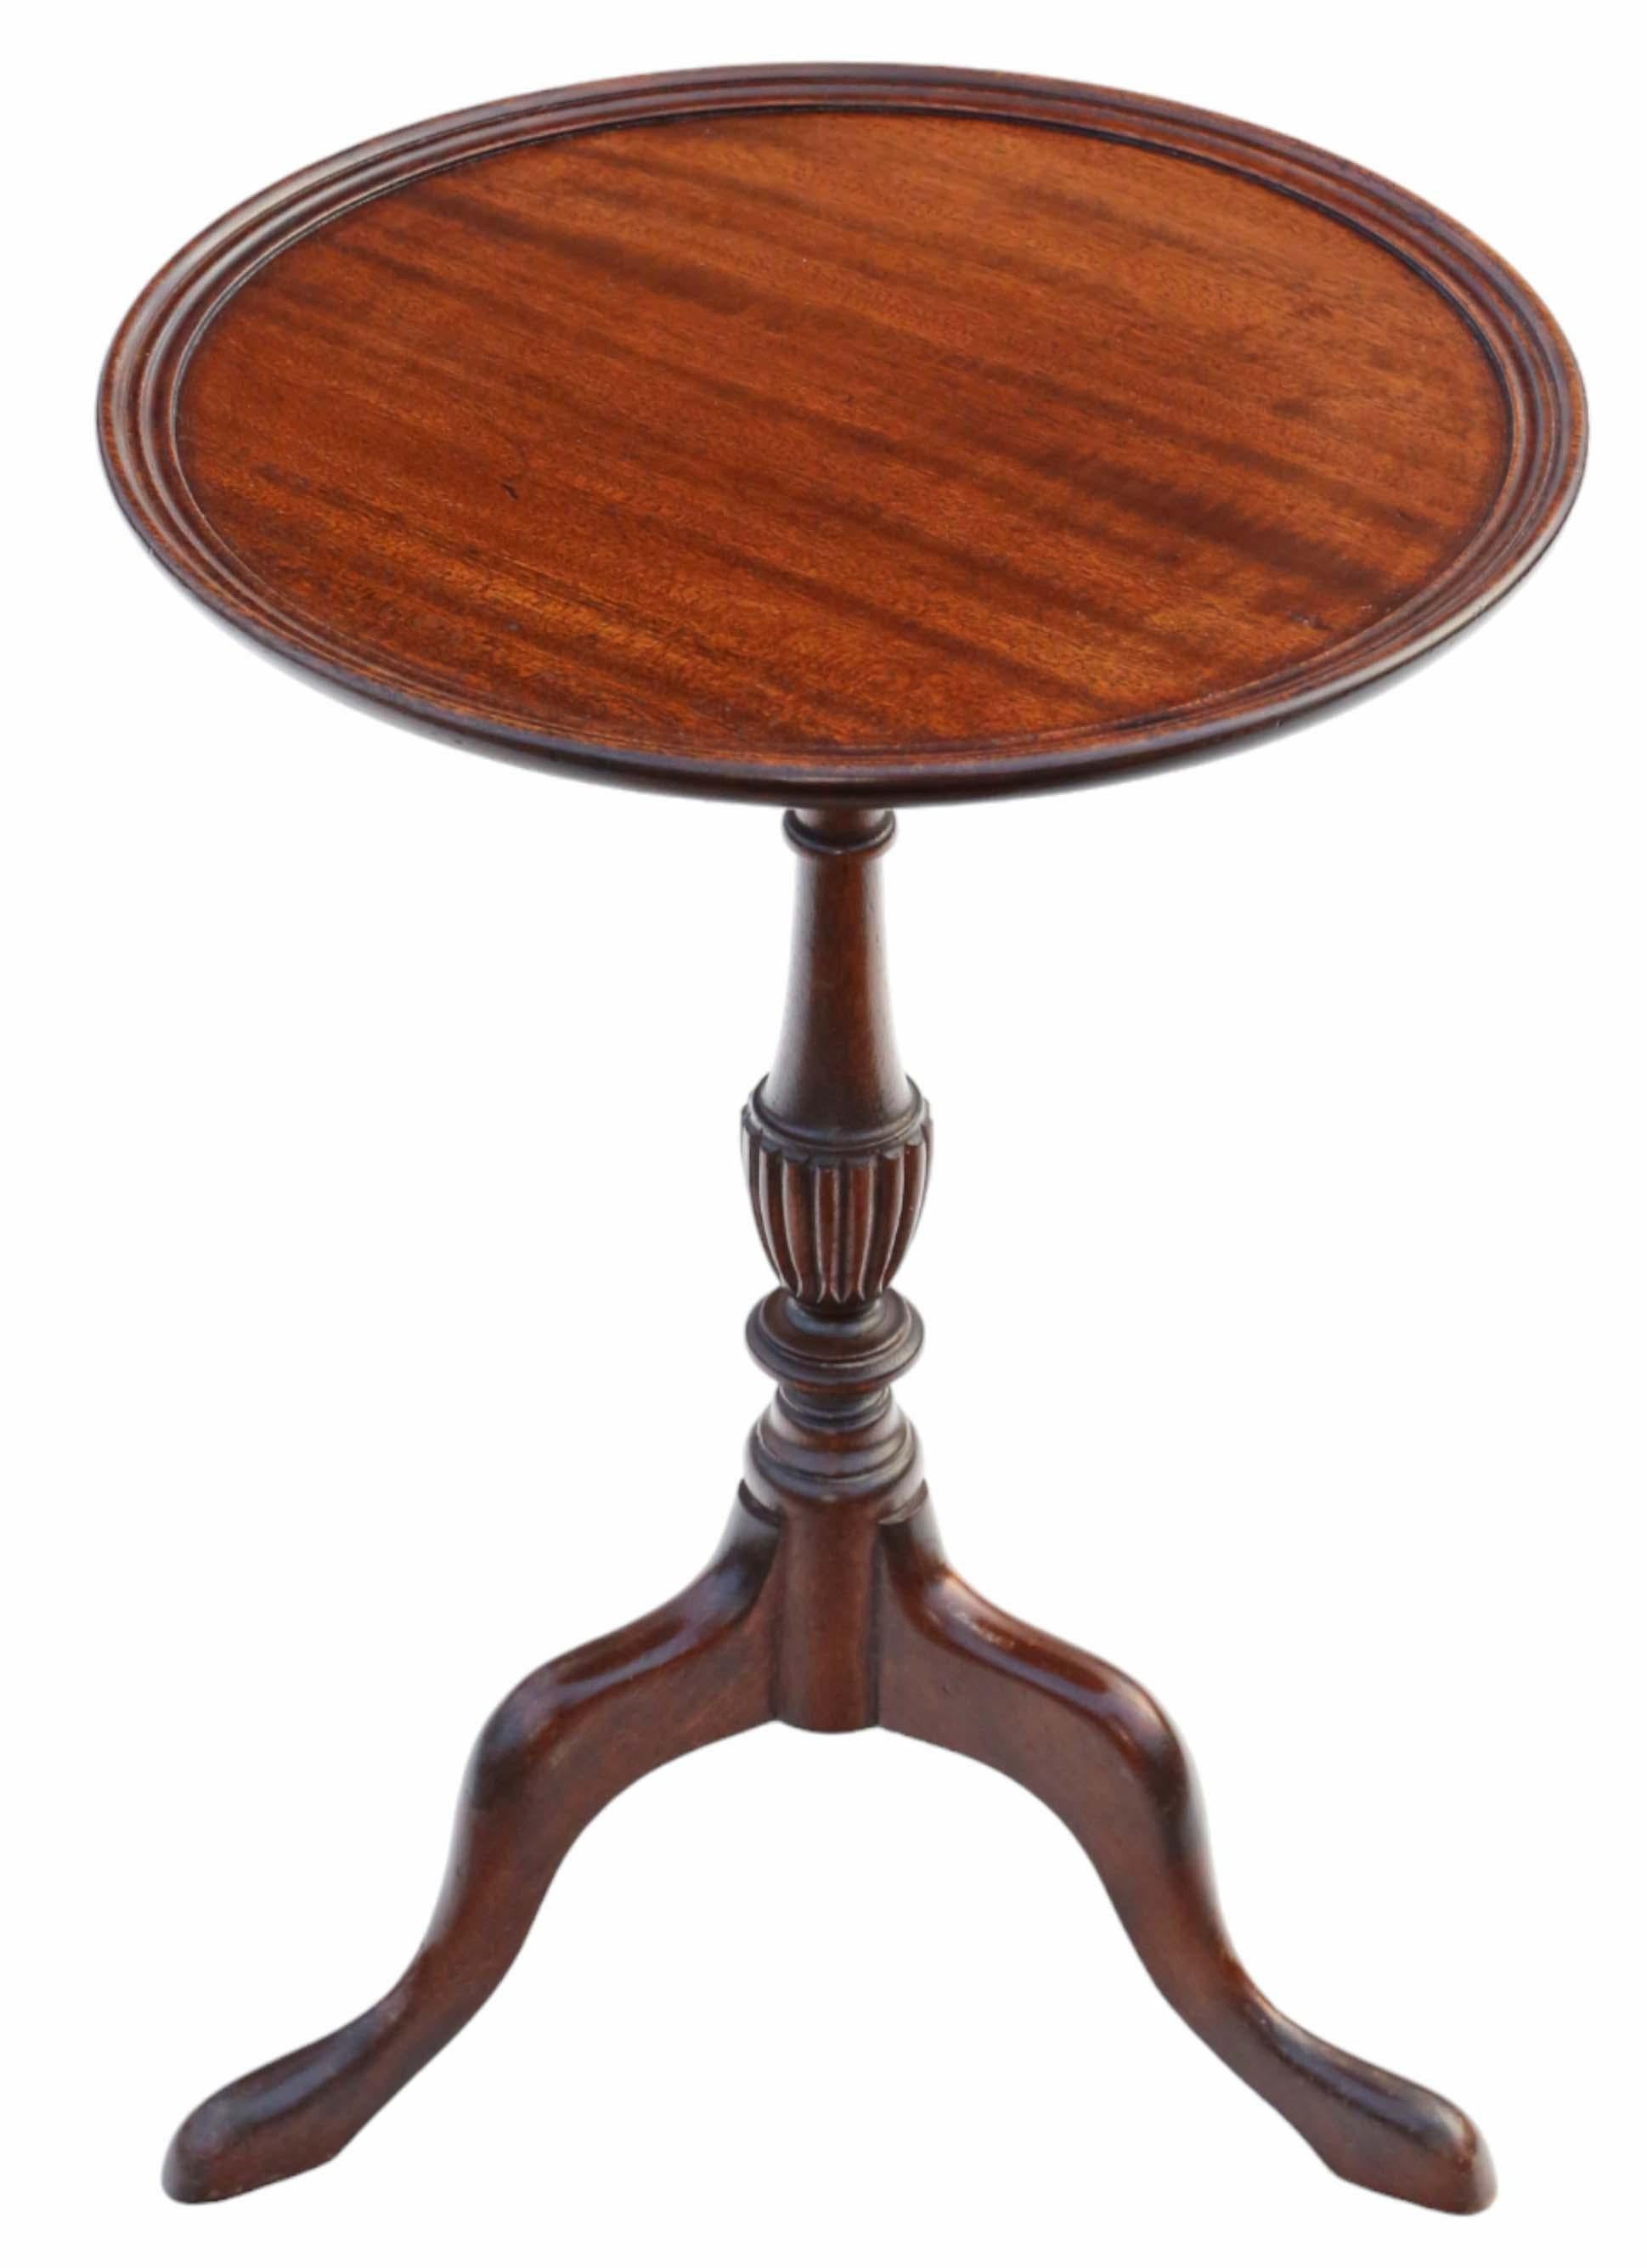 Vintage, fine-quality mid-20th Century Georgian revival wine or side table crafted from mahogany.

This table is solid with no loose joints, presenting itself as a charming piece.

There is no evidence of woodworm, and its aesthetic would complement